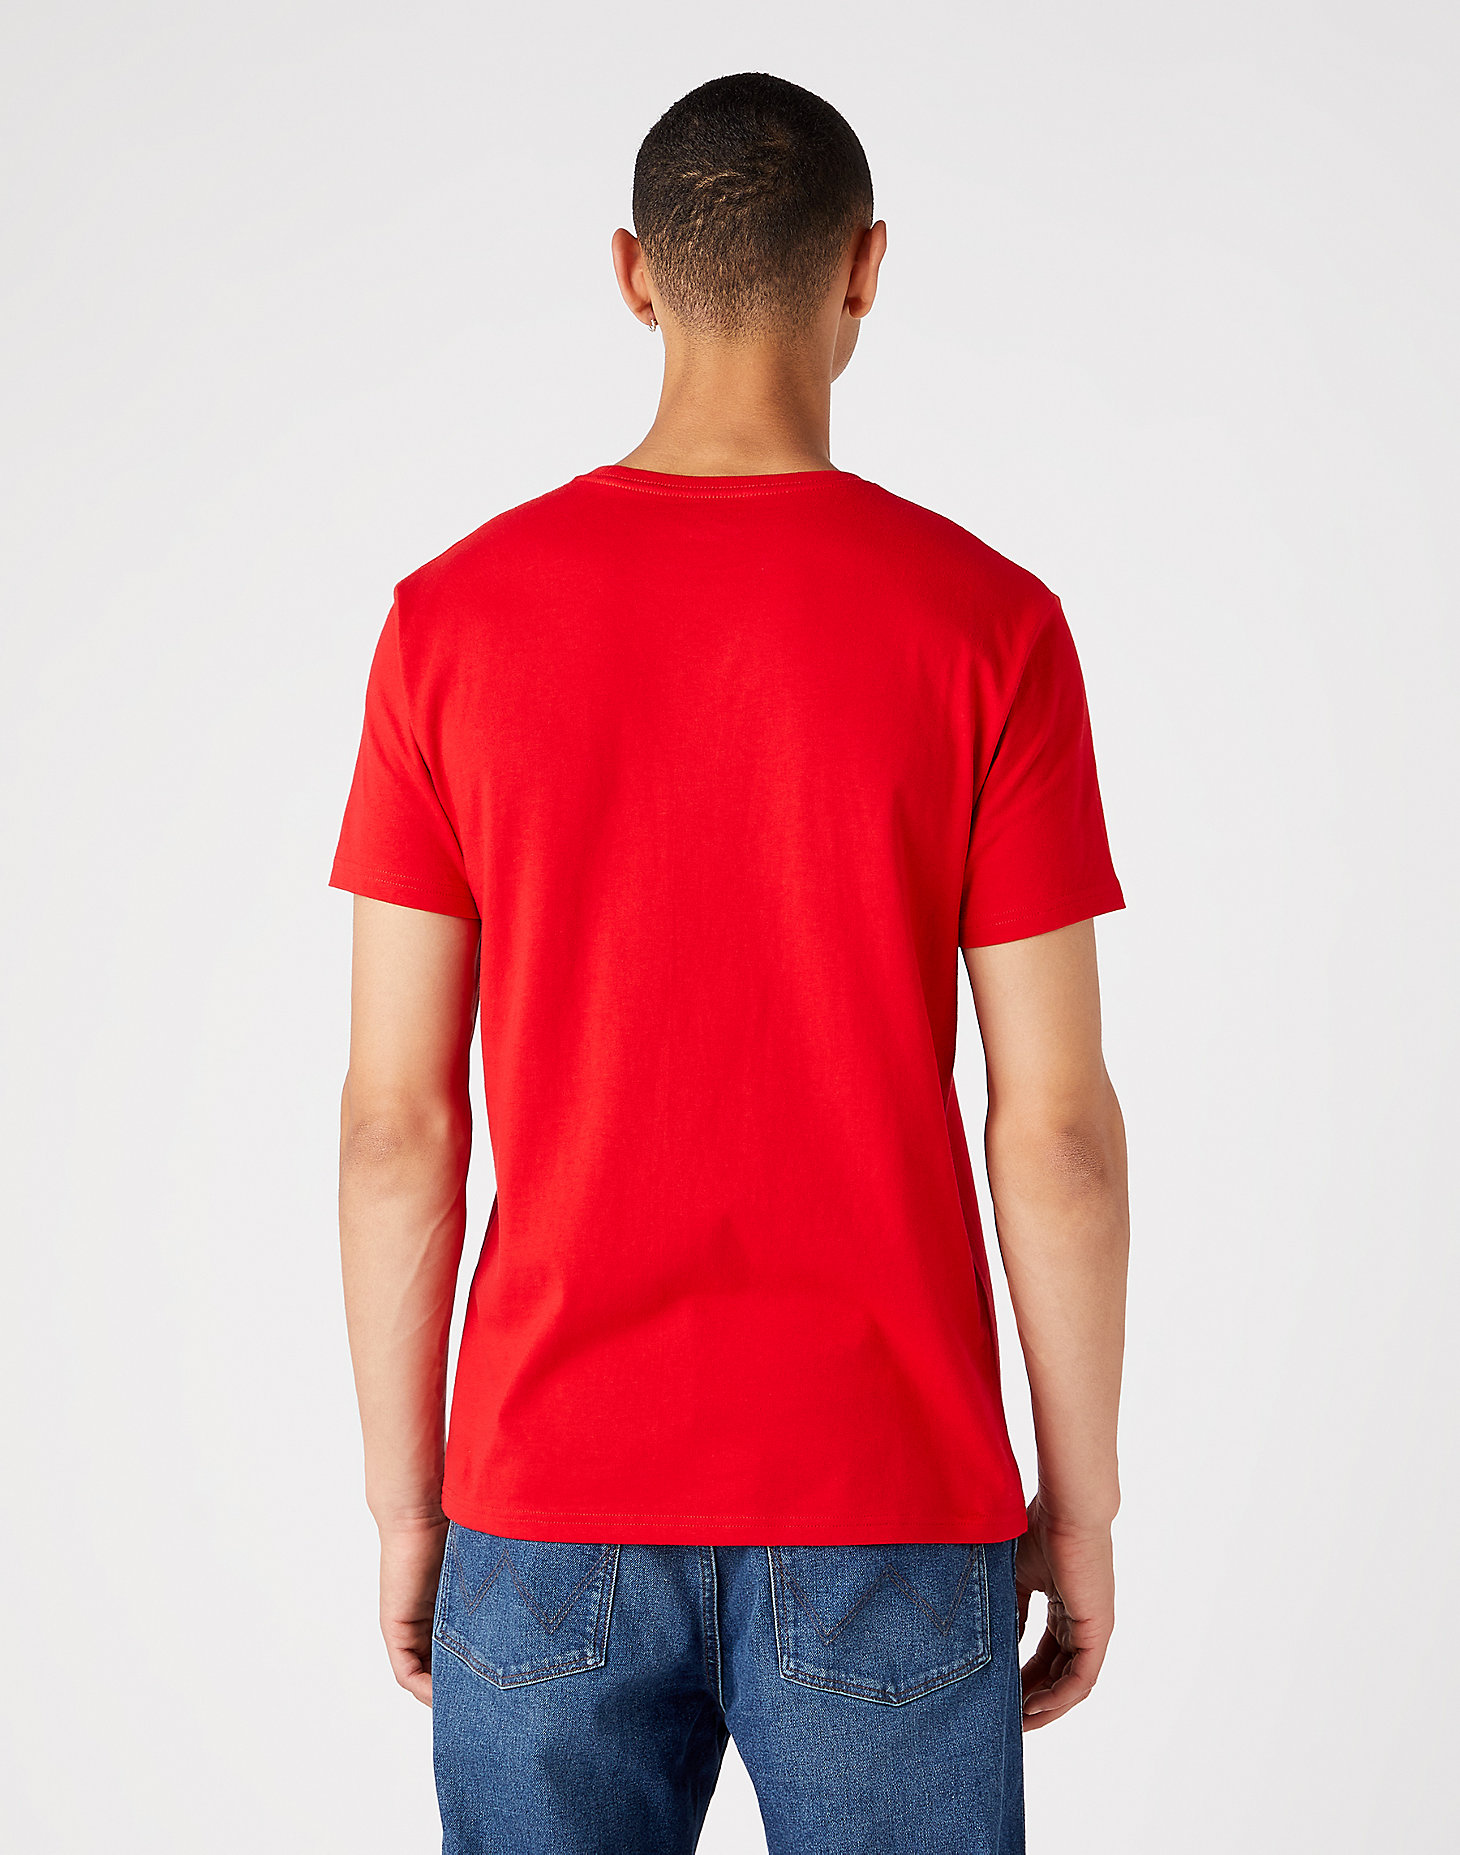 75th Anniversary Tee in Chinese Red alternative view 2